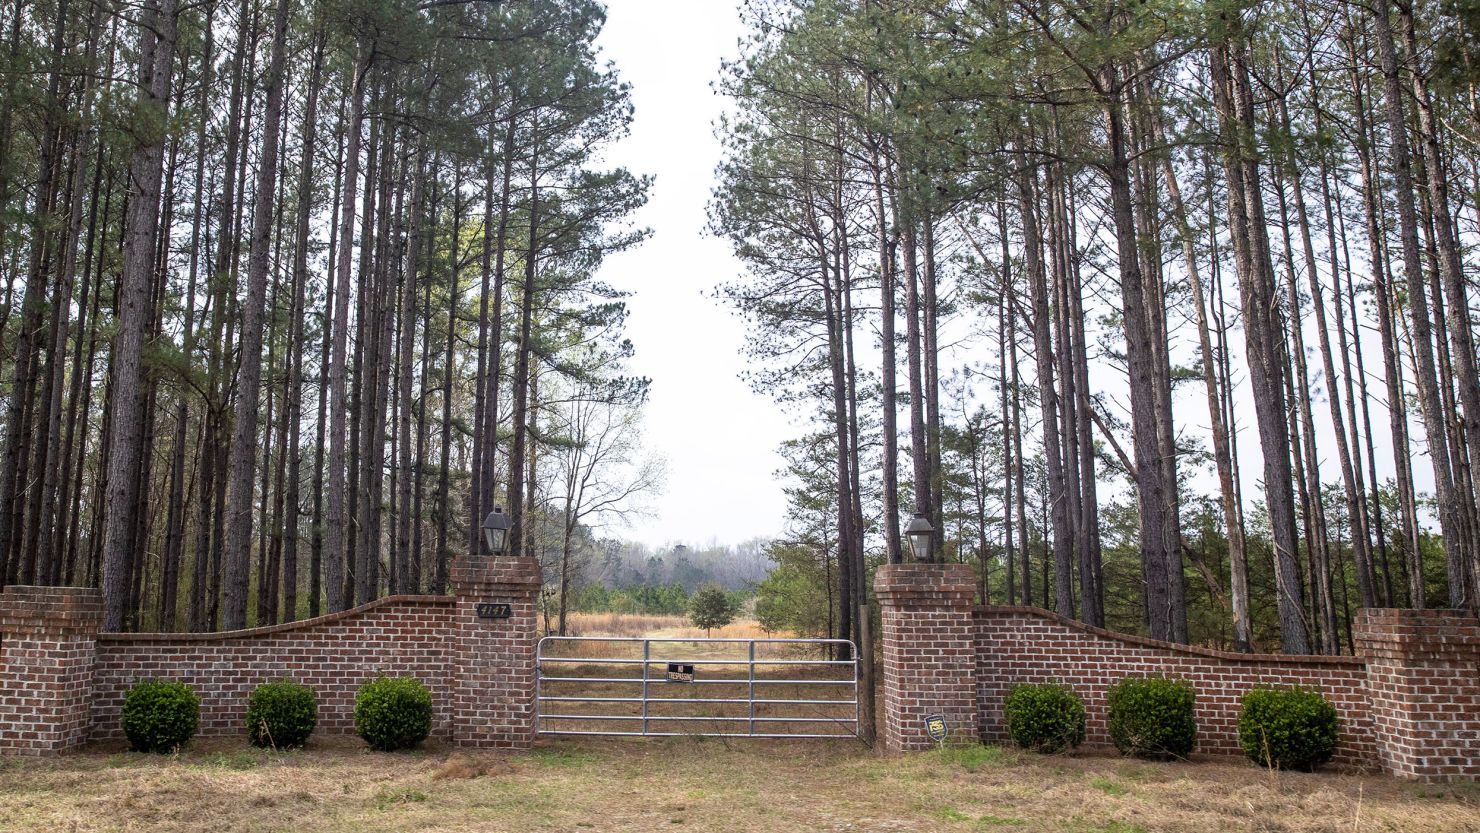 The entrance to the house at the Murdaugh Moselle property on Wednesday, March 1, 2023 in Islandton, South Carolina. The contents of the home are set to be auctioned on Thursday. (Andrew J. Whitaker/The Post And Courier via AP, Pool)